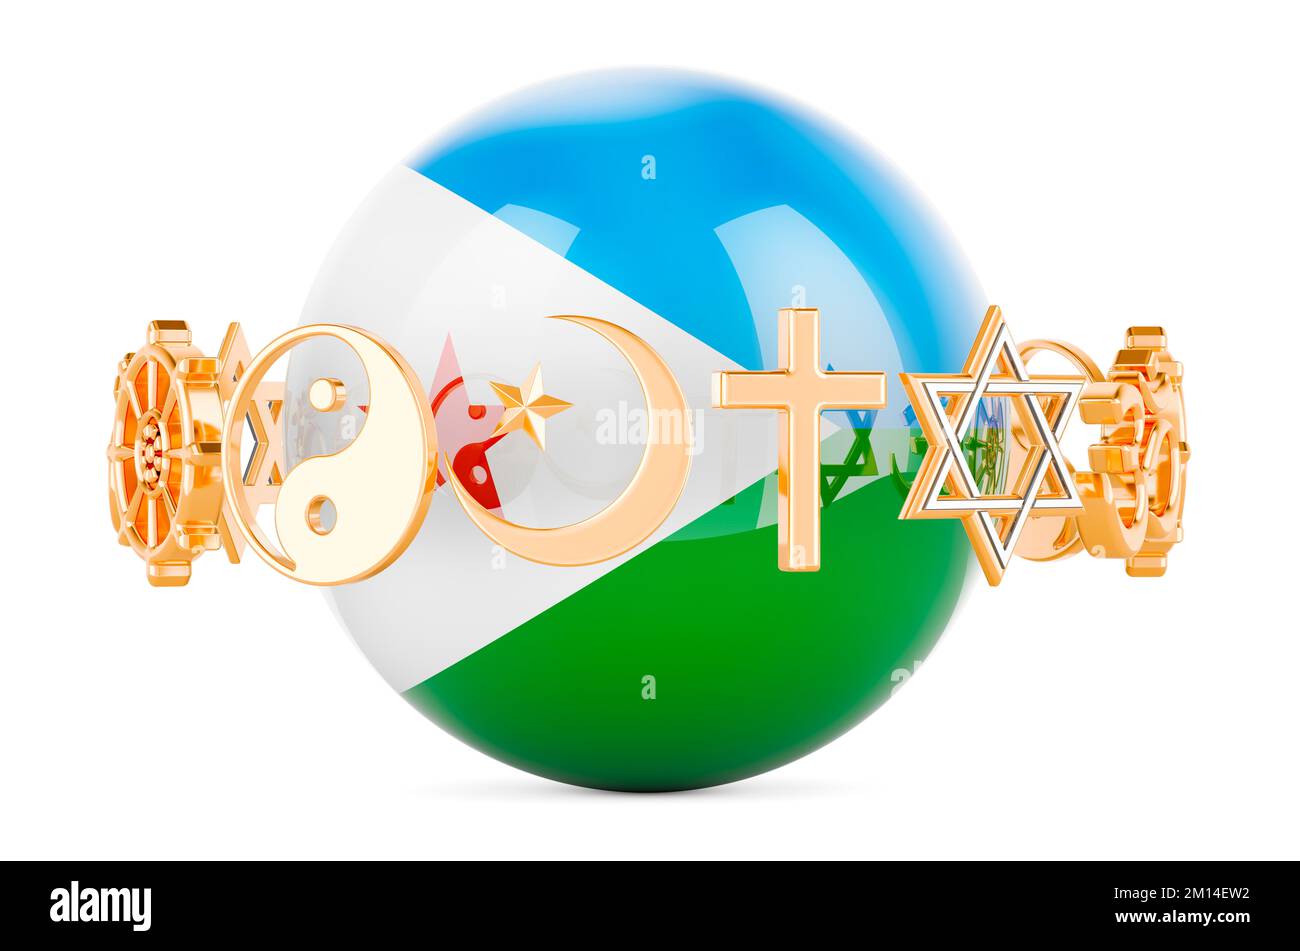 Djiboutian flag painted on sphere with religions symbols around, 3D rendering isolated on white background Stock Photo